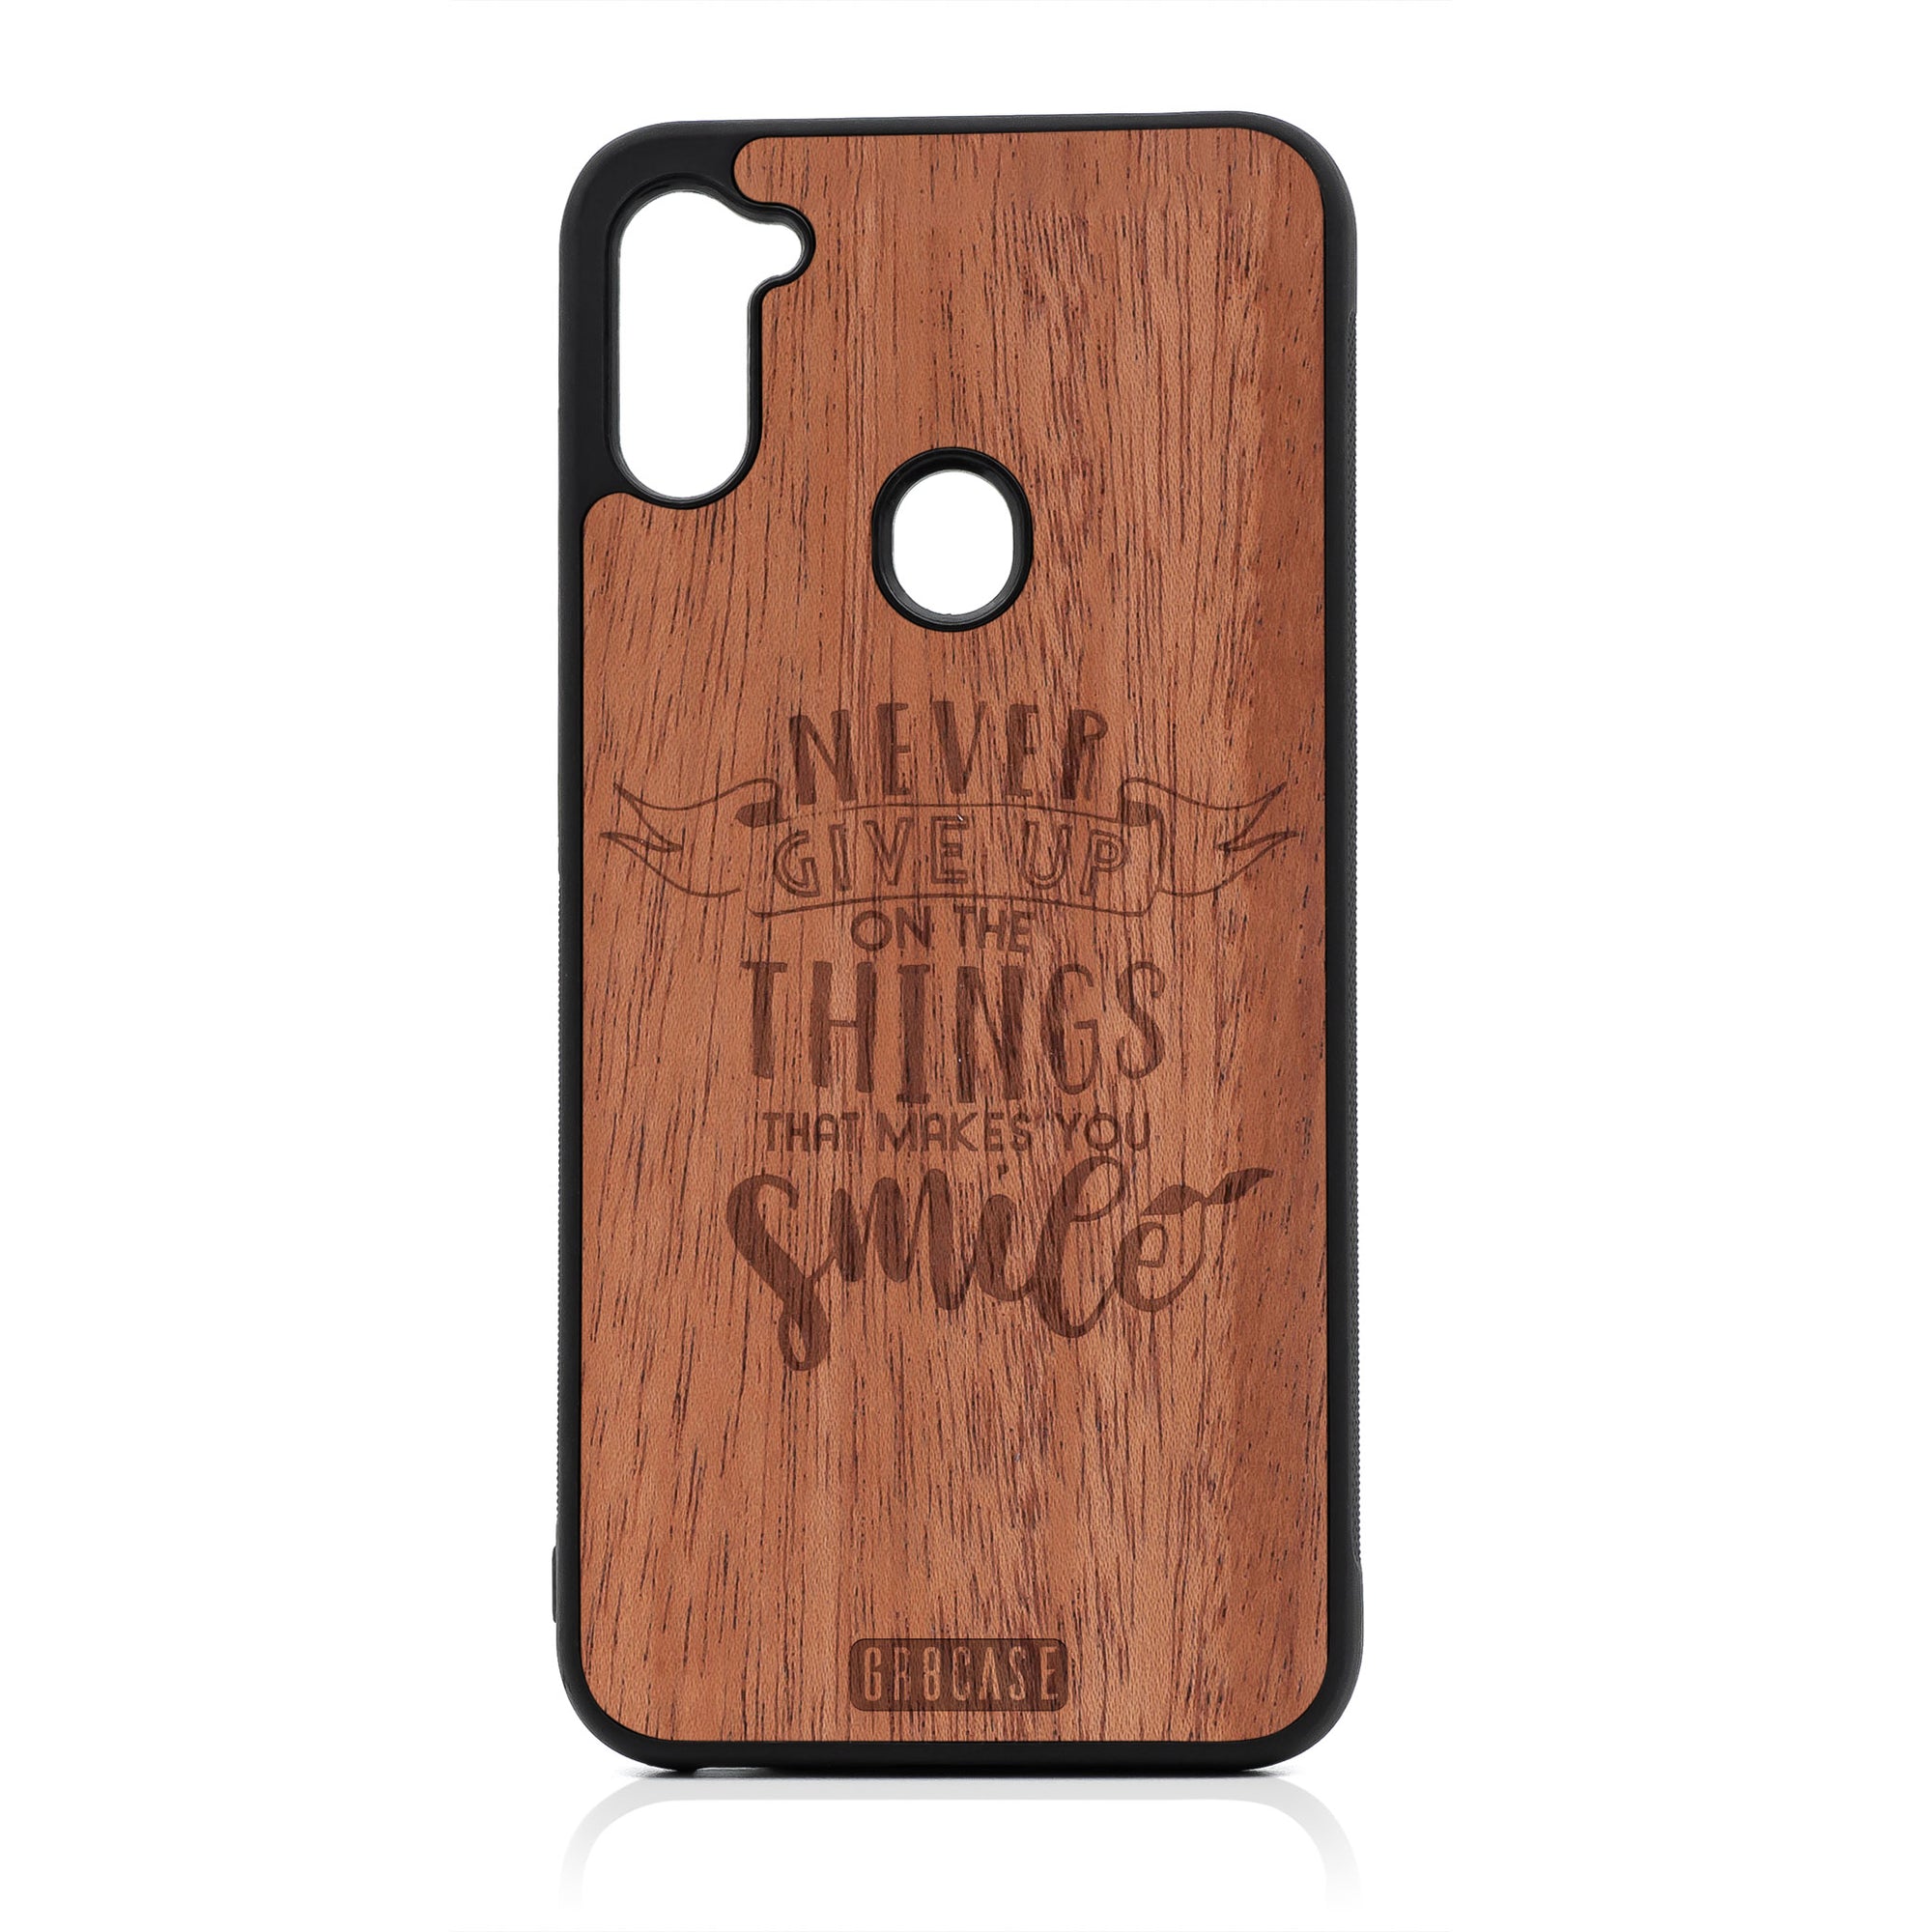 Never Give Up On The Things That Makes You Smile Design Wood Case For Samsung Galaxy A11